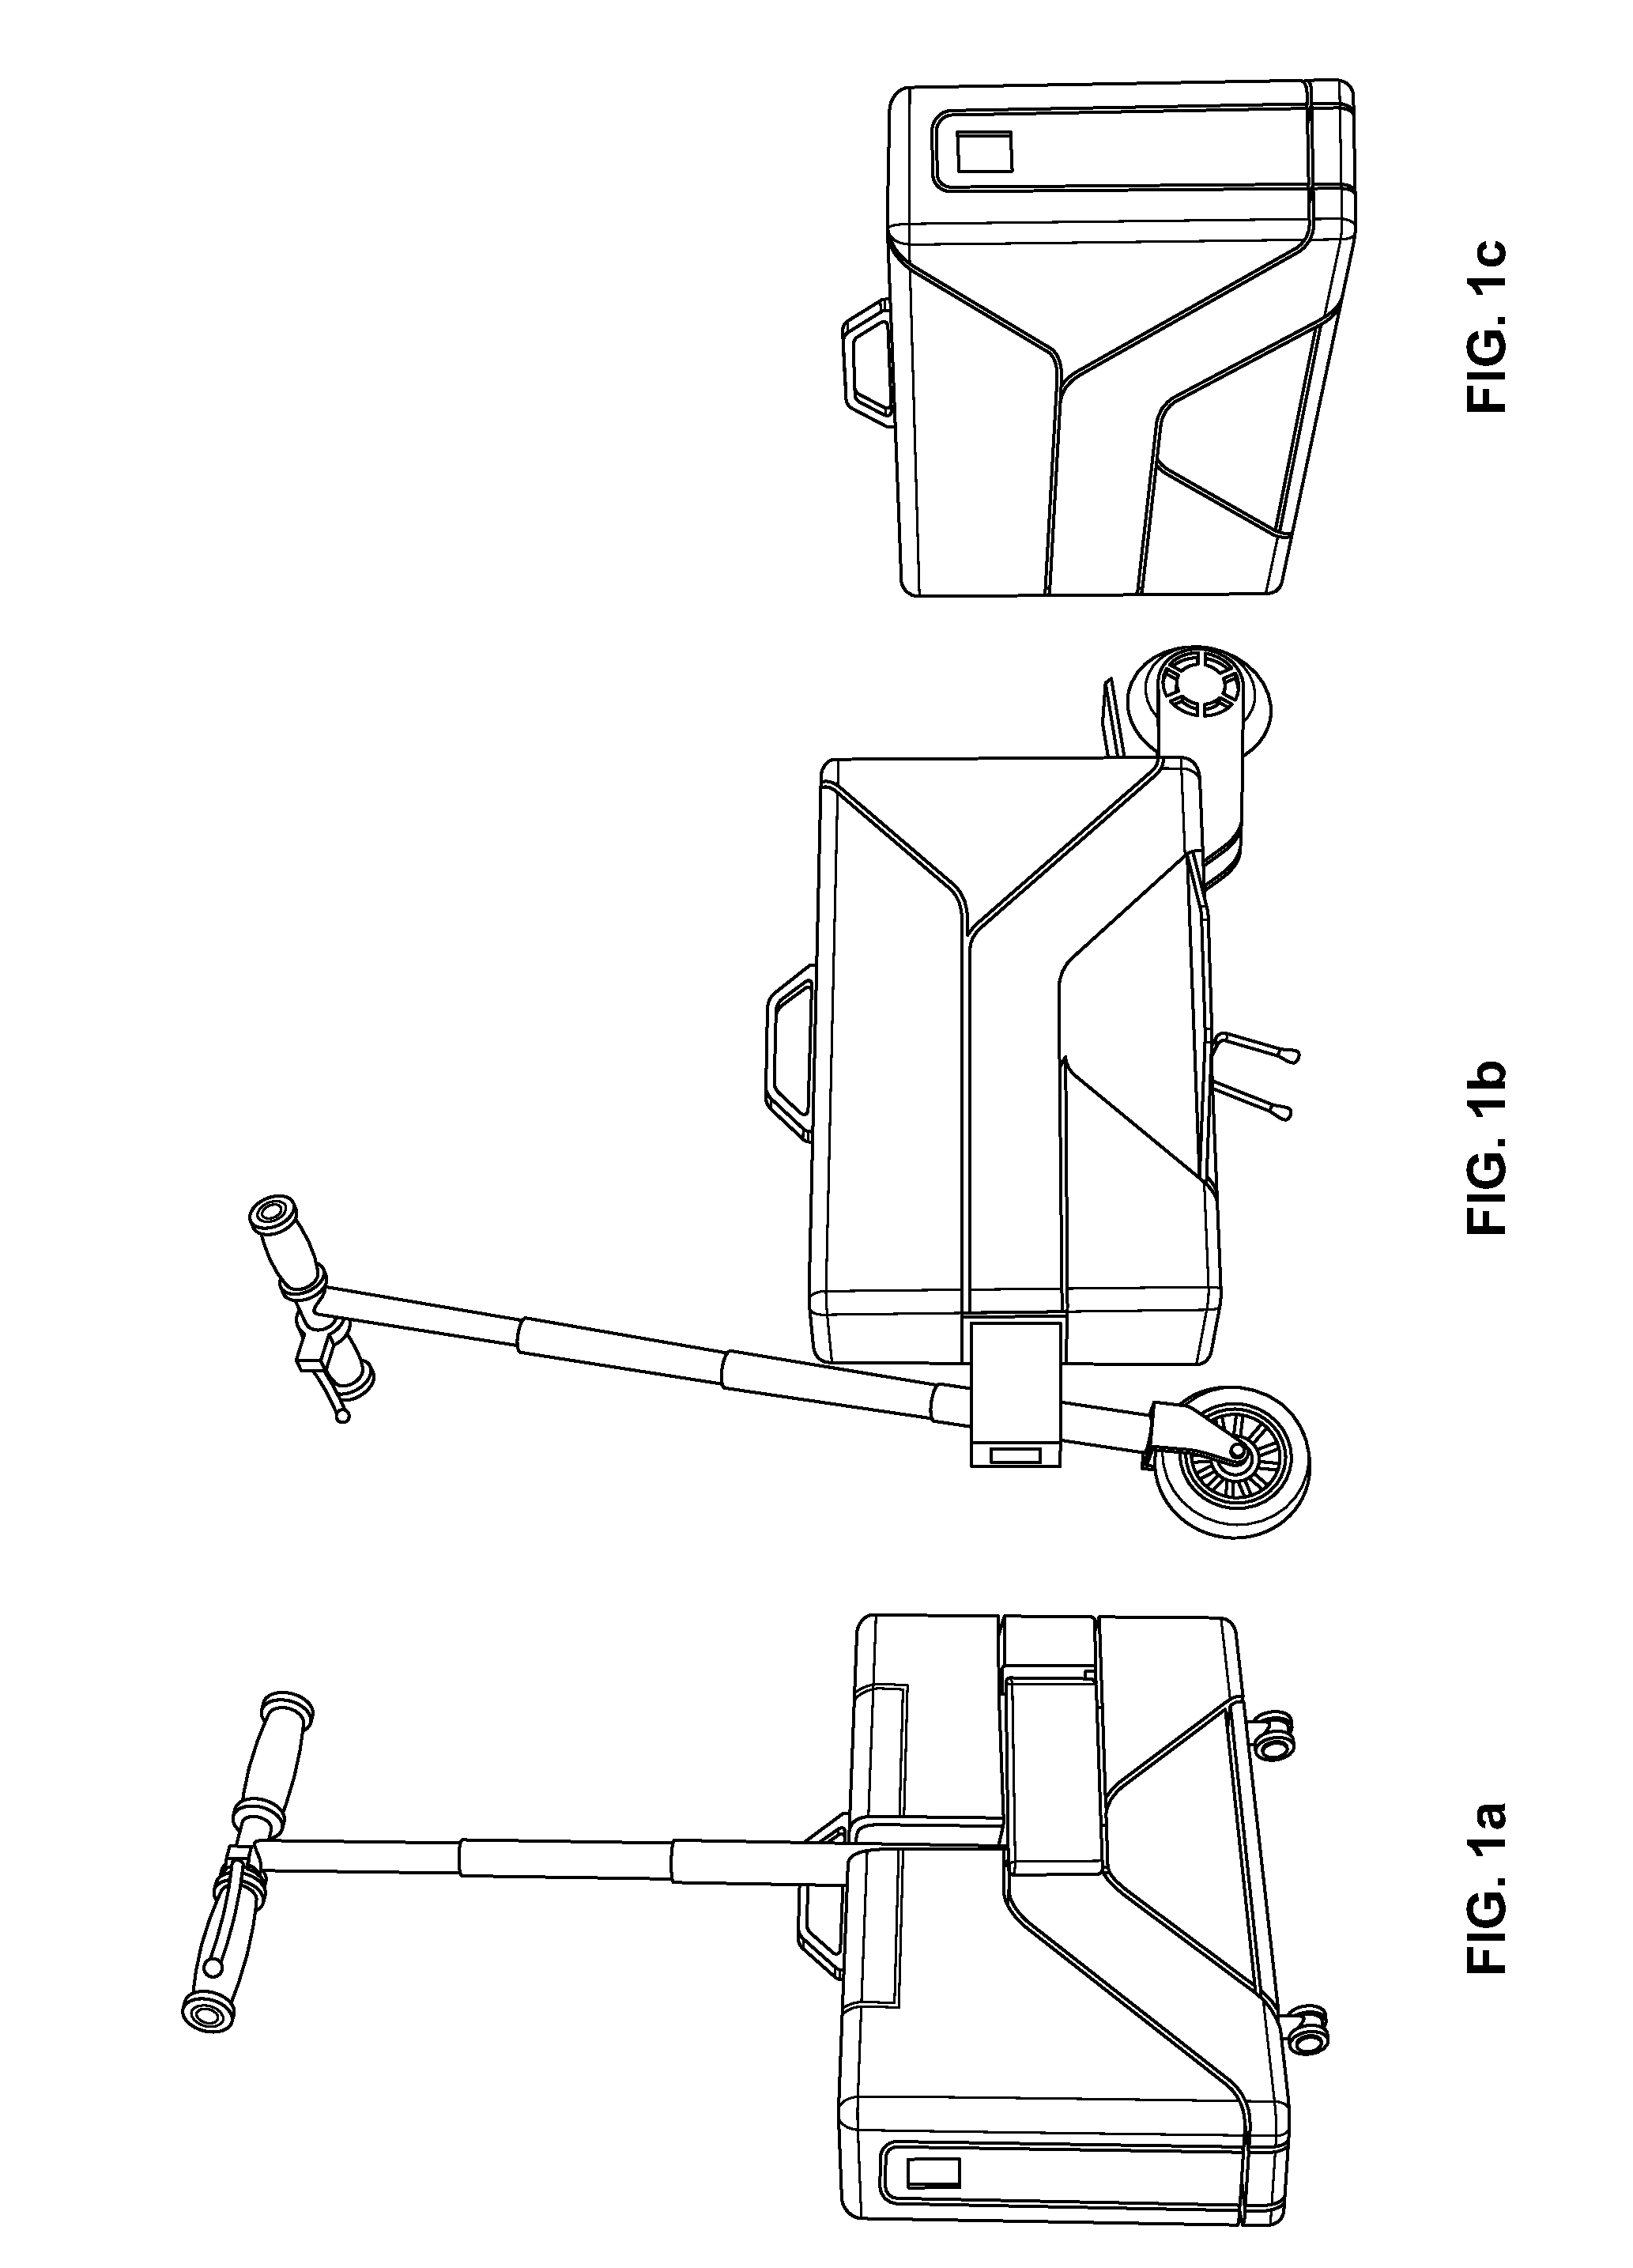 Multi-functional personal mobility device compacting to briefcase size